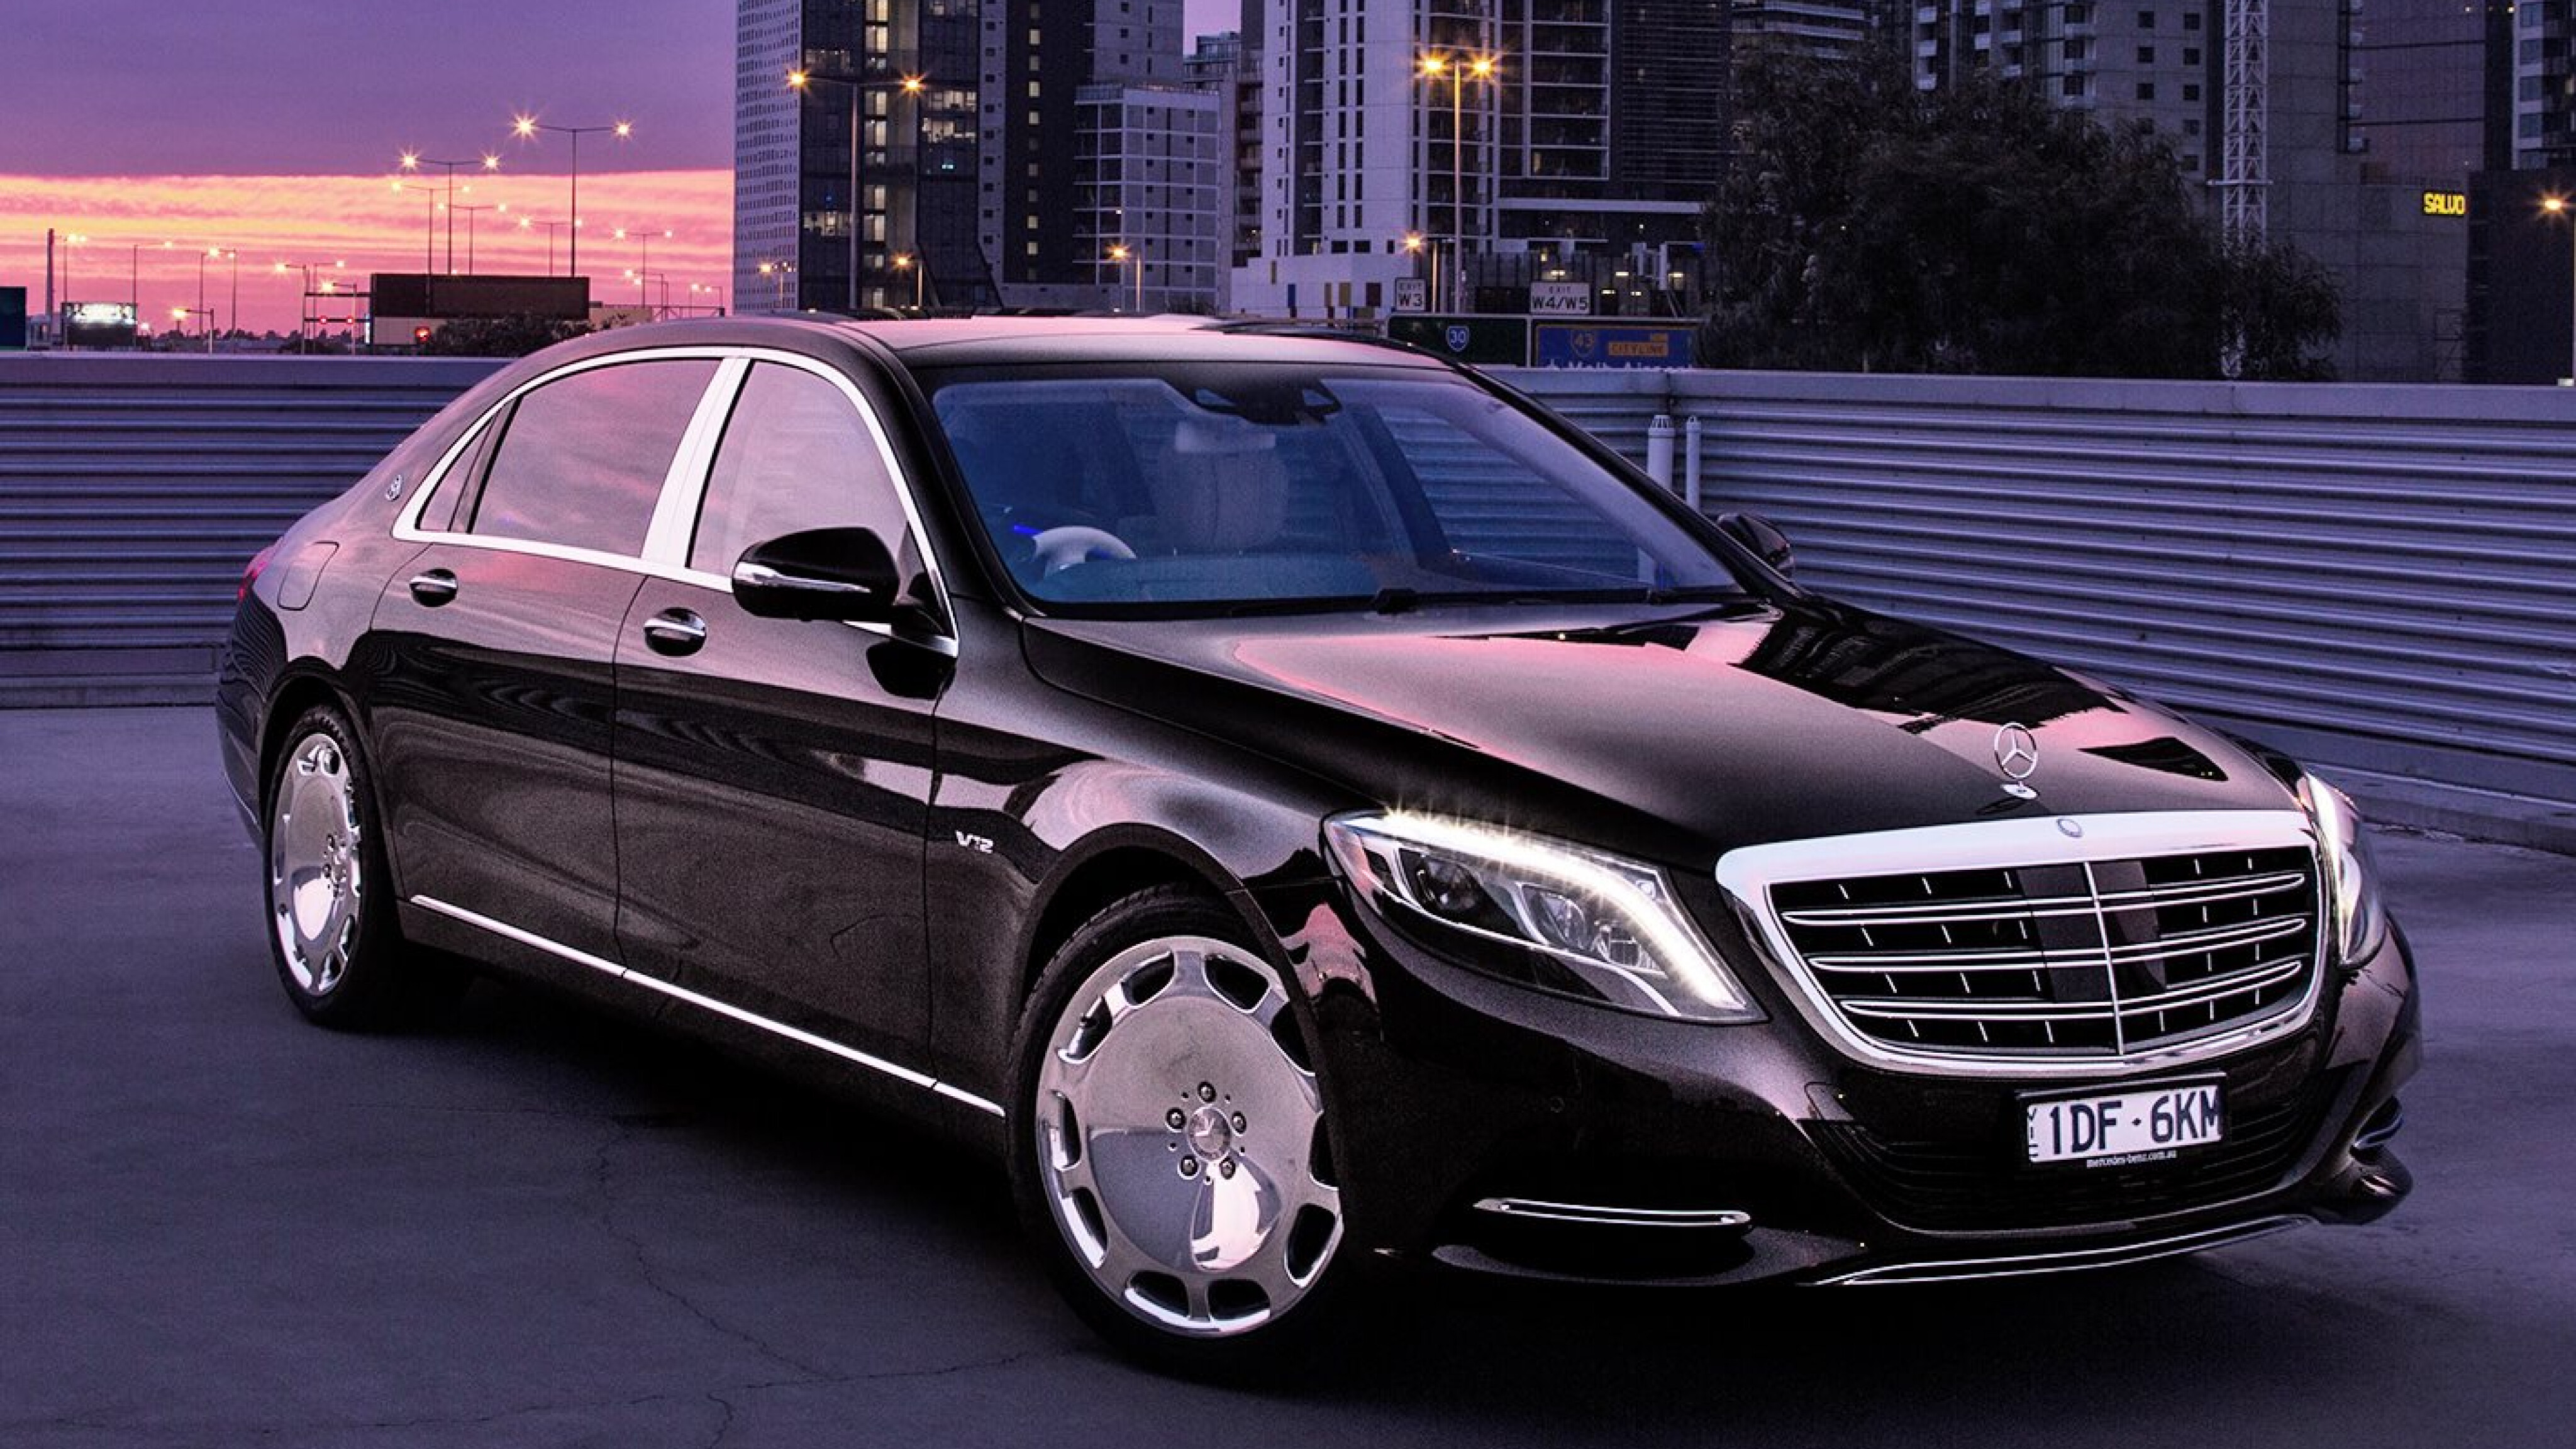 S600 цена. Майбах-Мерседес s600. Mercedes Benz Maybach s600. Мерседес Майбах 600. Мерседес Бенц s600 Maybach.